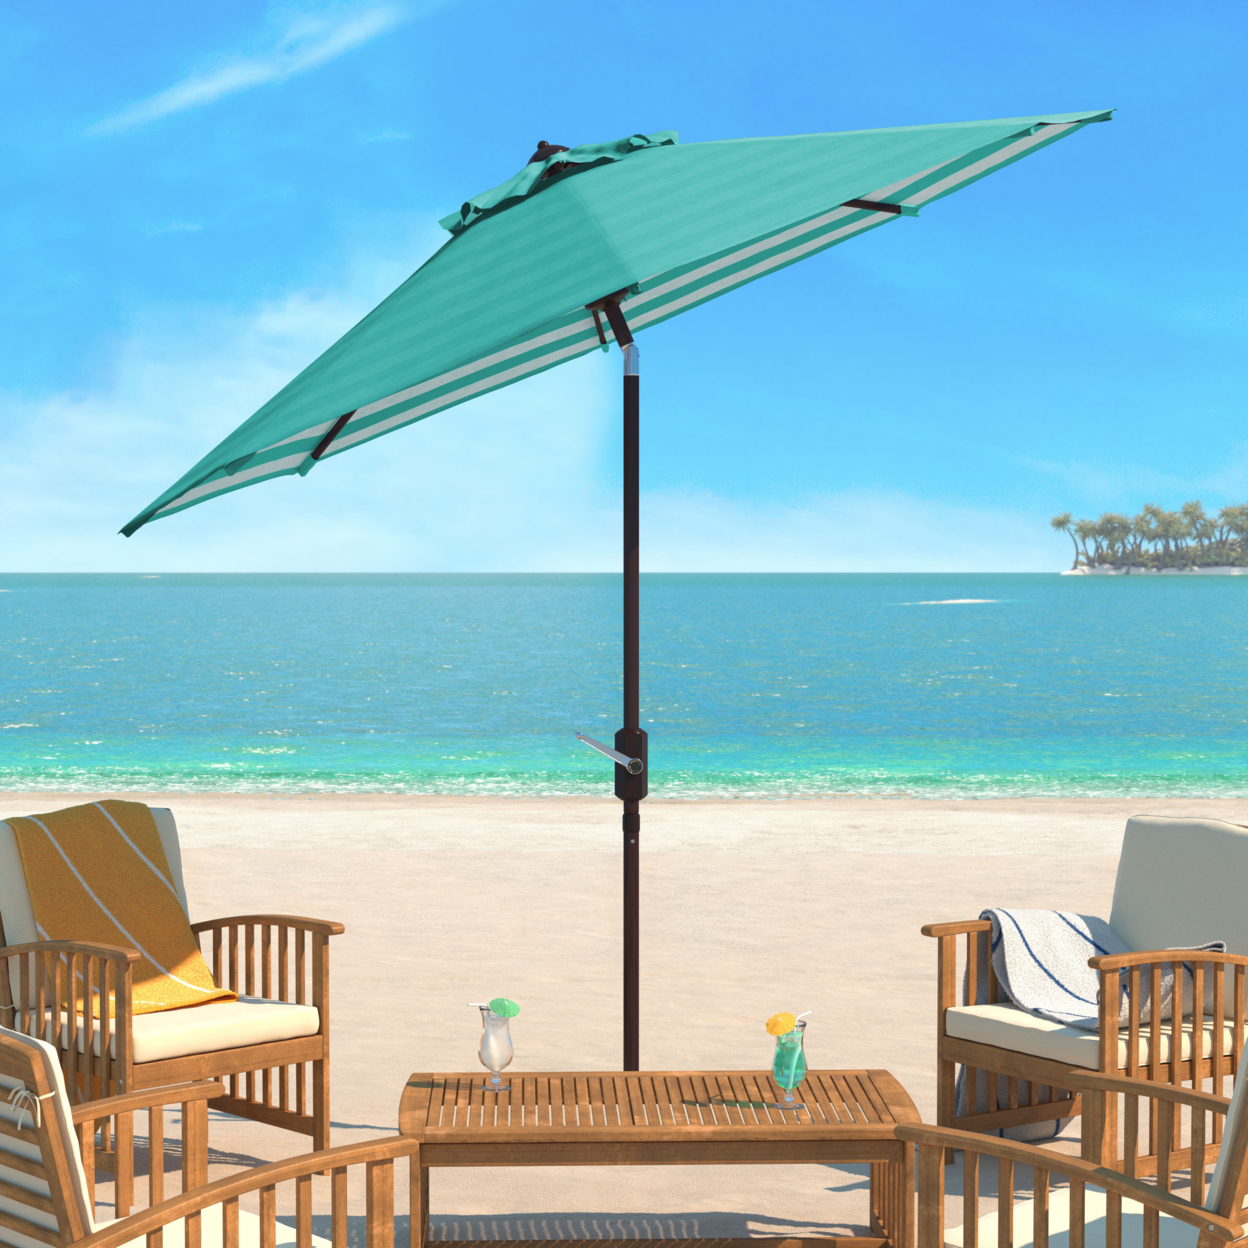 SAFAVIEH Outdoor Collection Athens Inside Out Striped 9-Foot Umbrella Dark Green/White